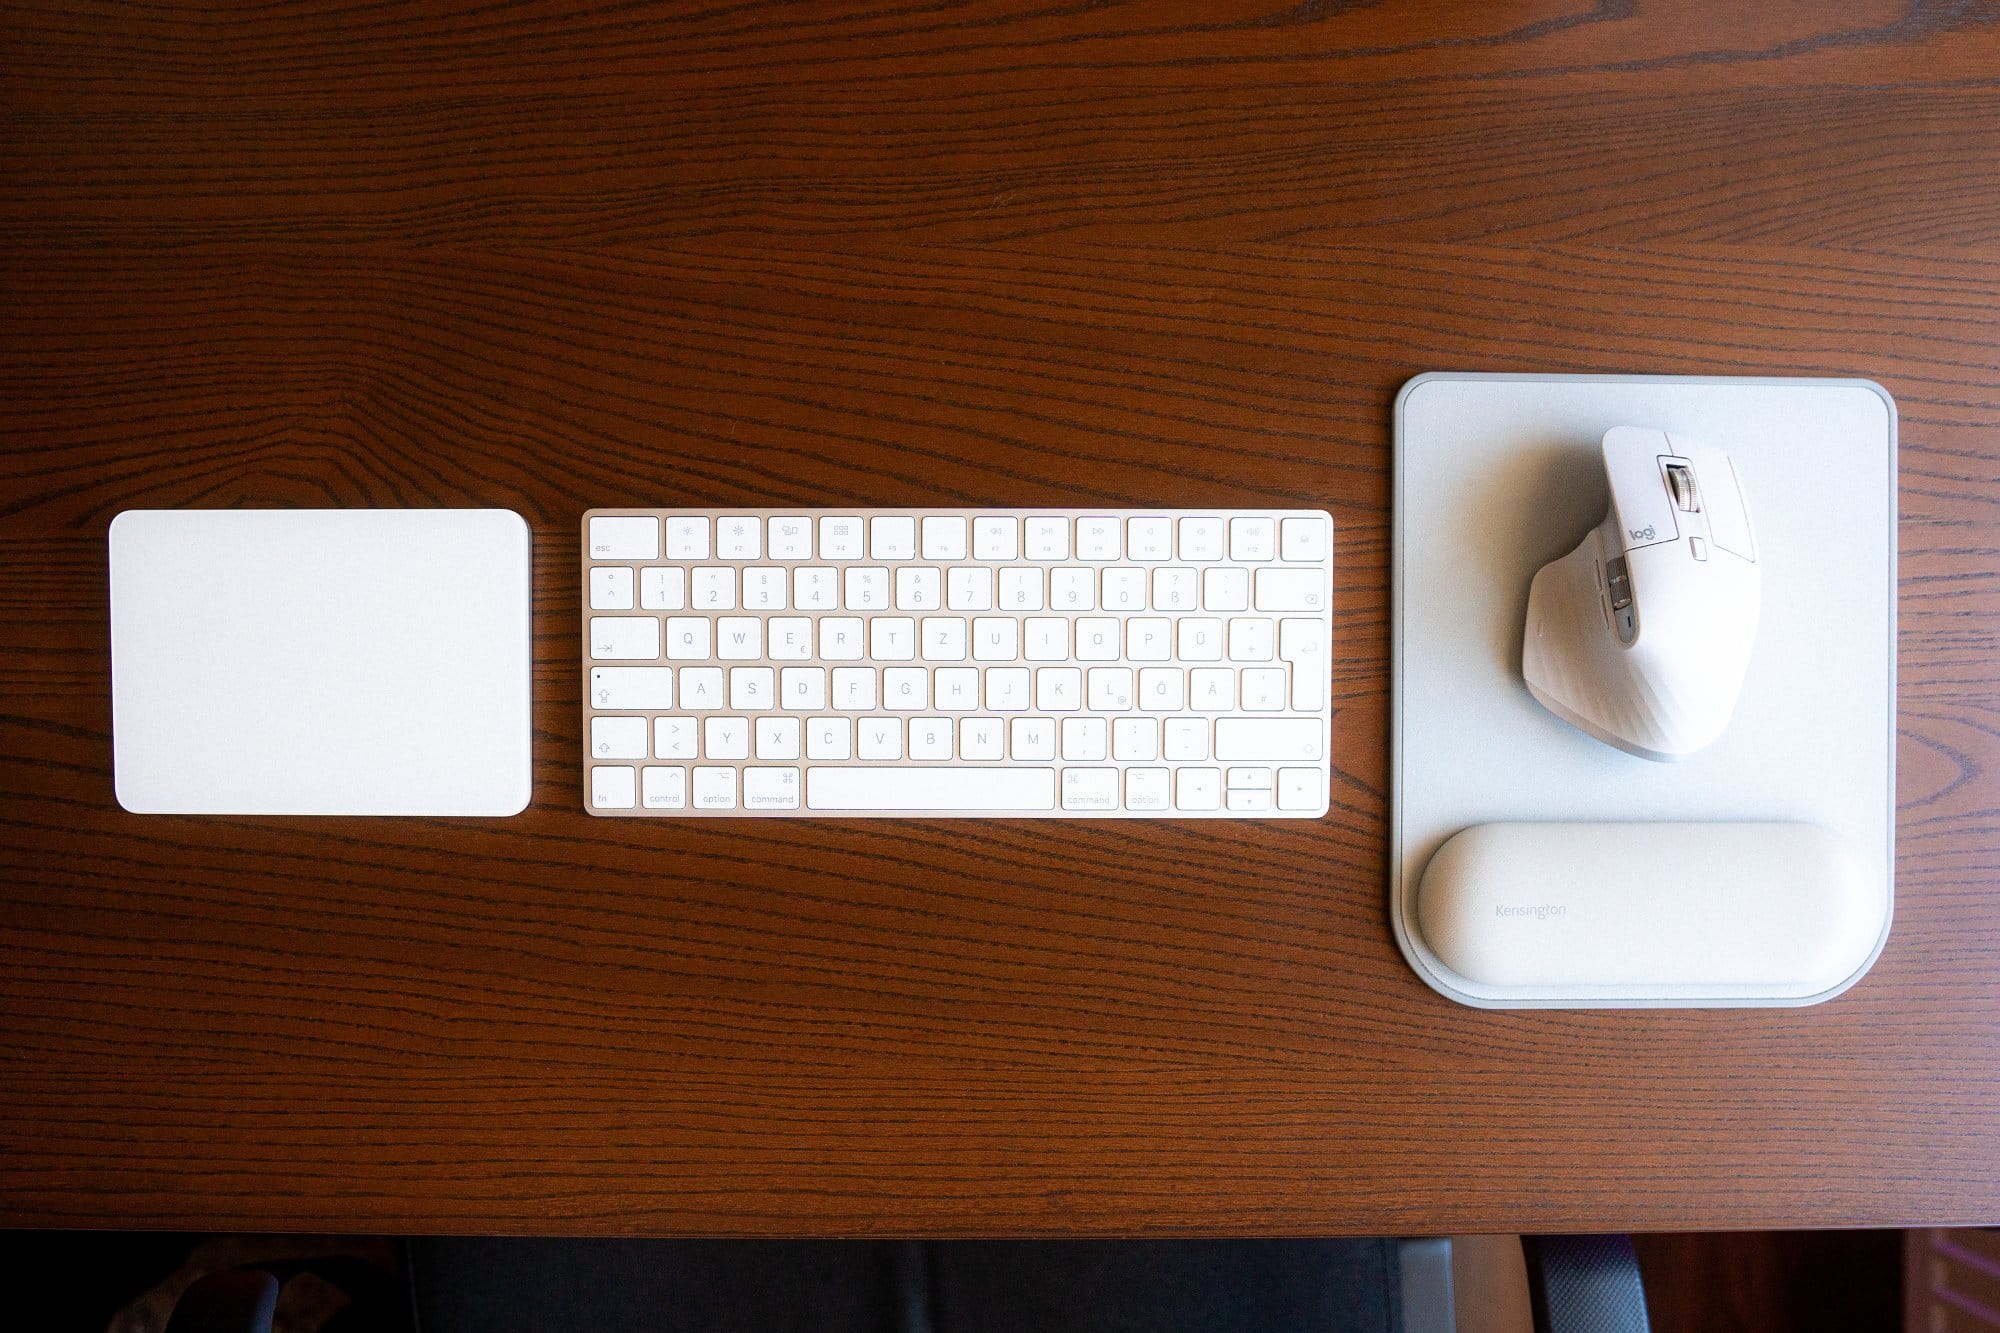 A top-down view of a workspace with a white keyboard, a trackpad, an ergonomic mouse on a mouse pad, all neatly arranged on a wooden desk